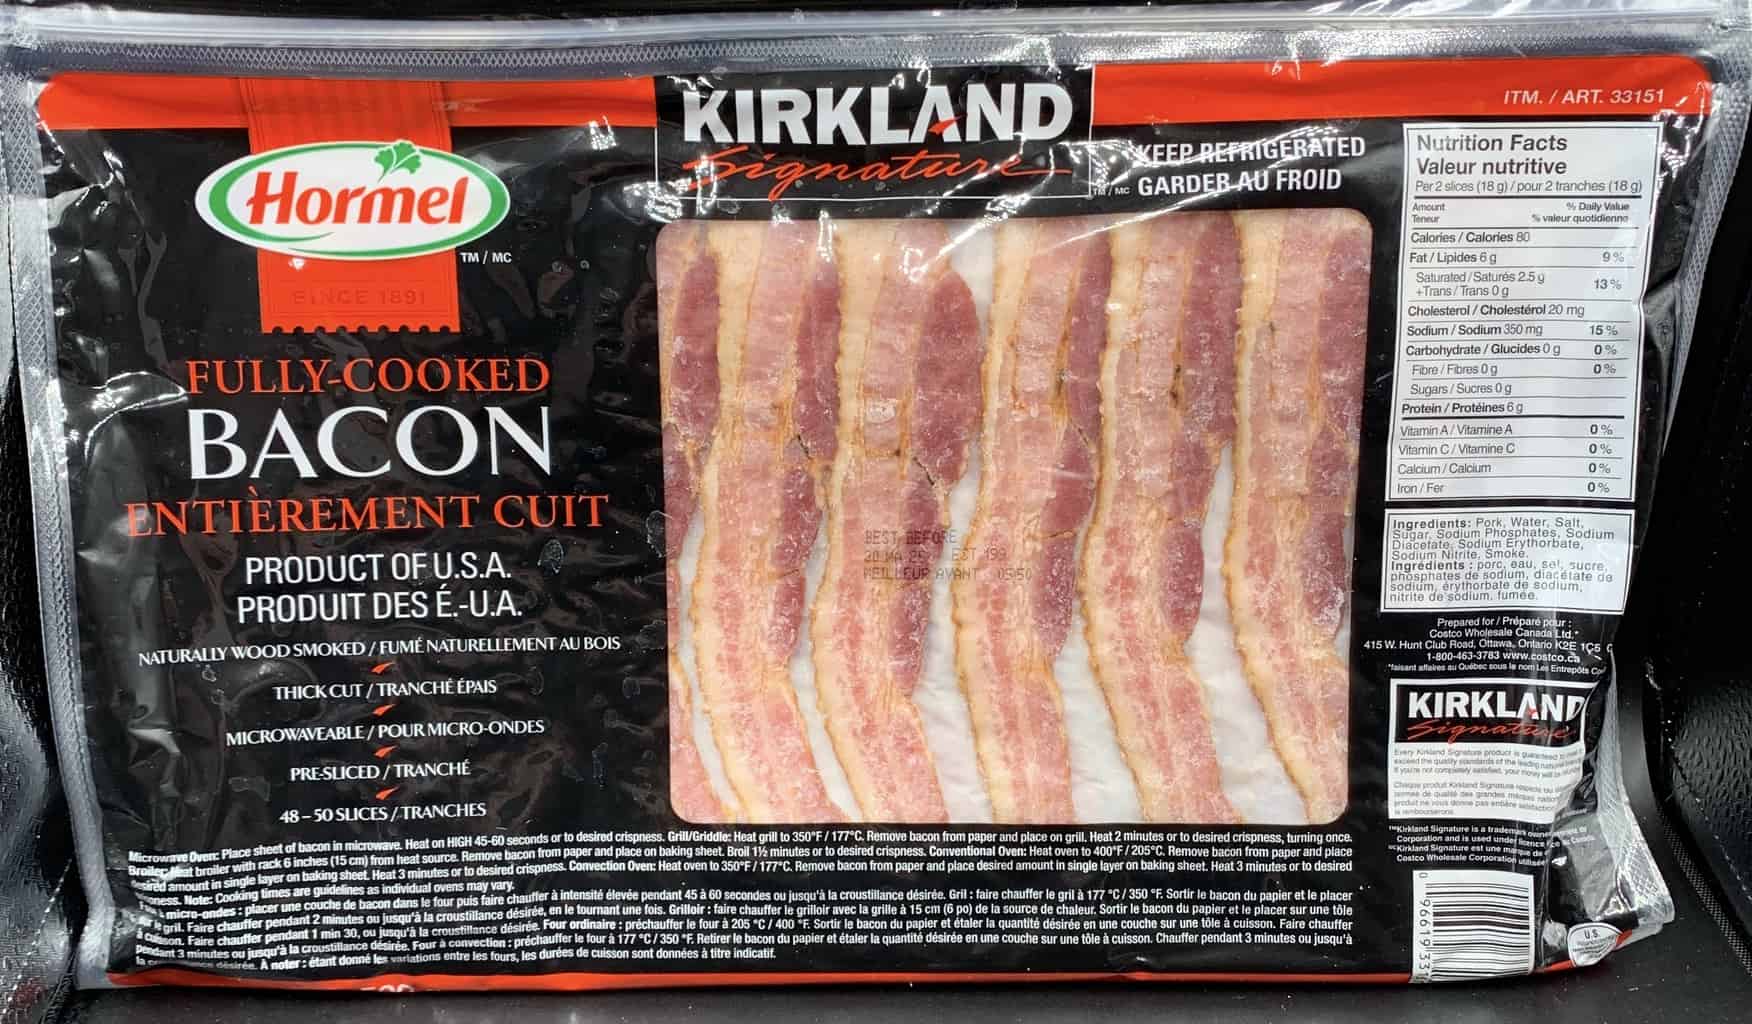 costco-kirkland-signature-hormel-fully-cooked-bacon-review-costcuisine